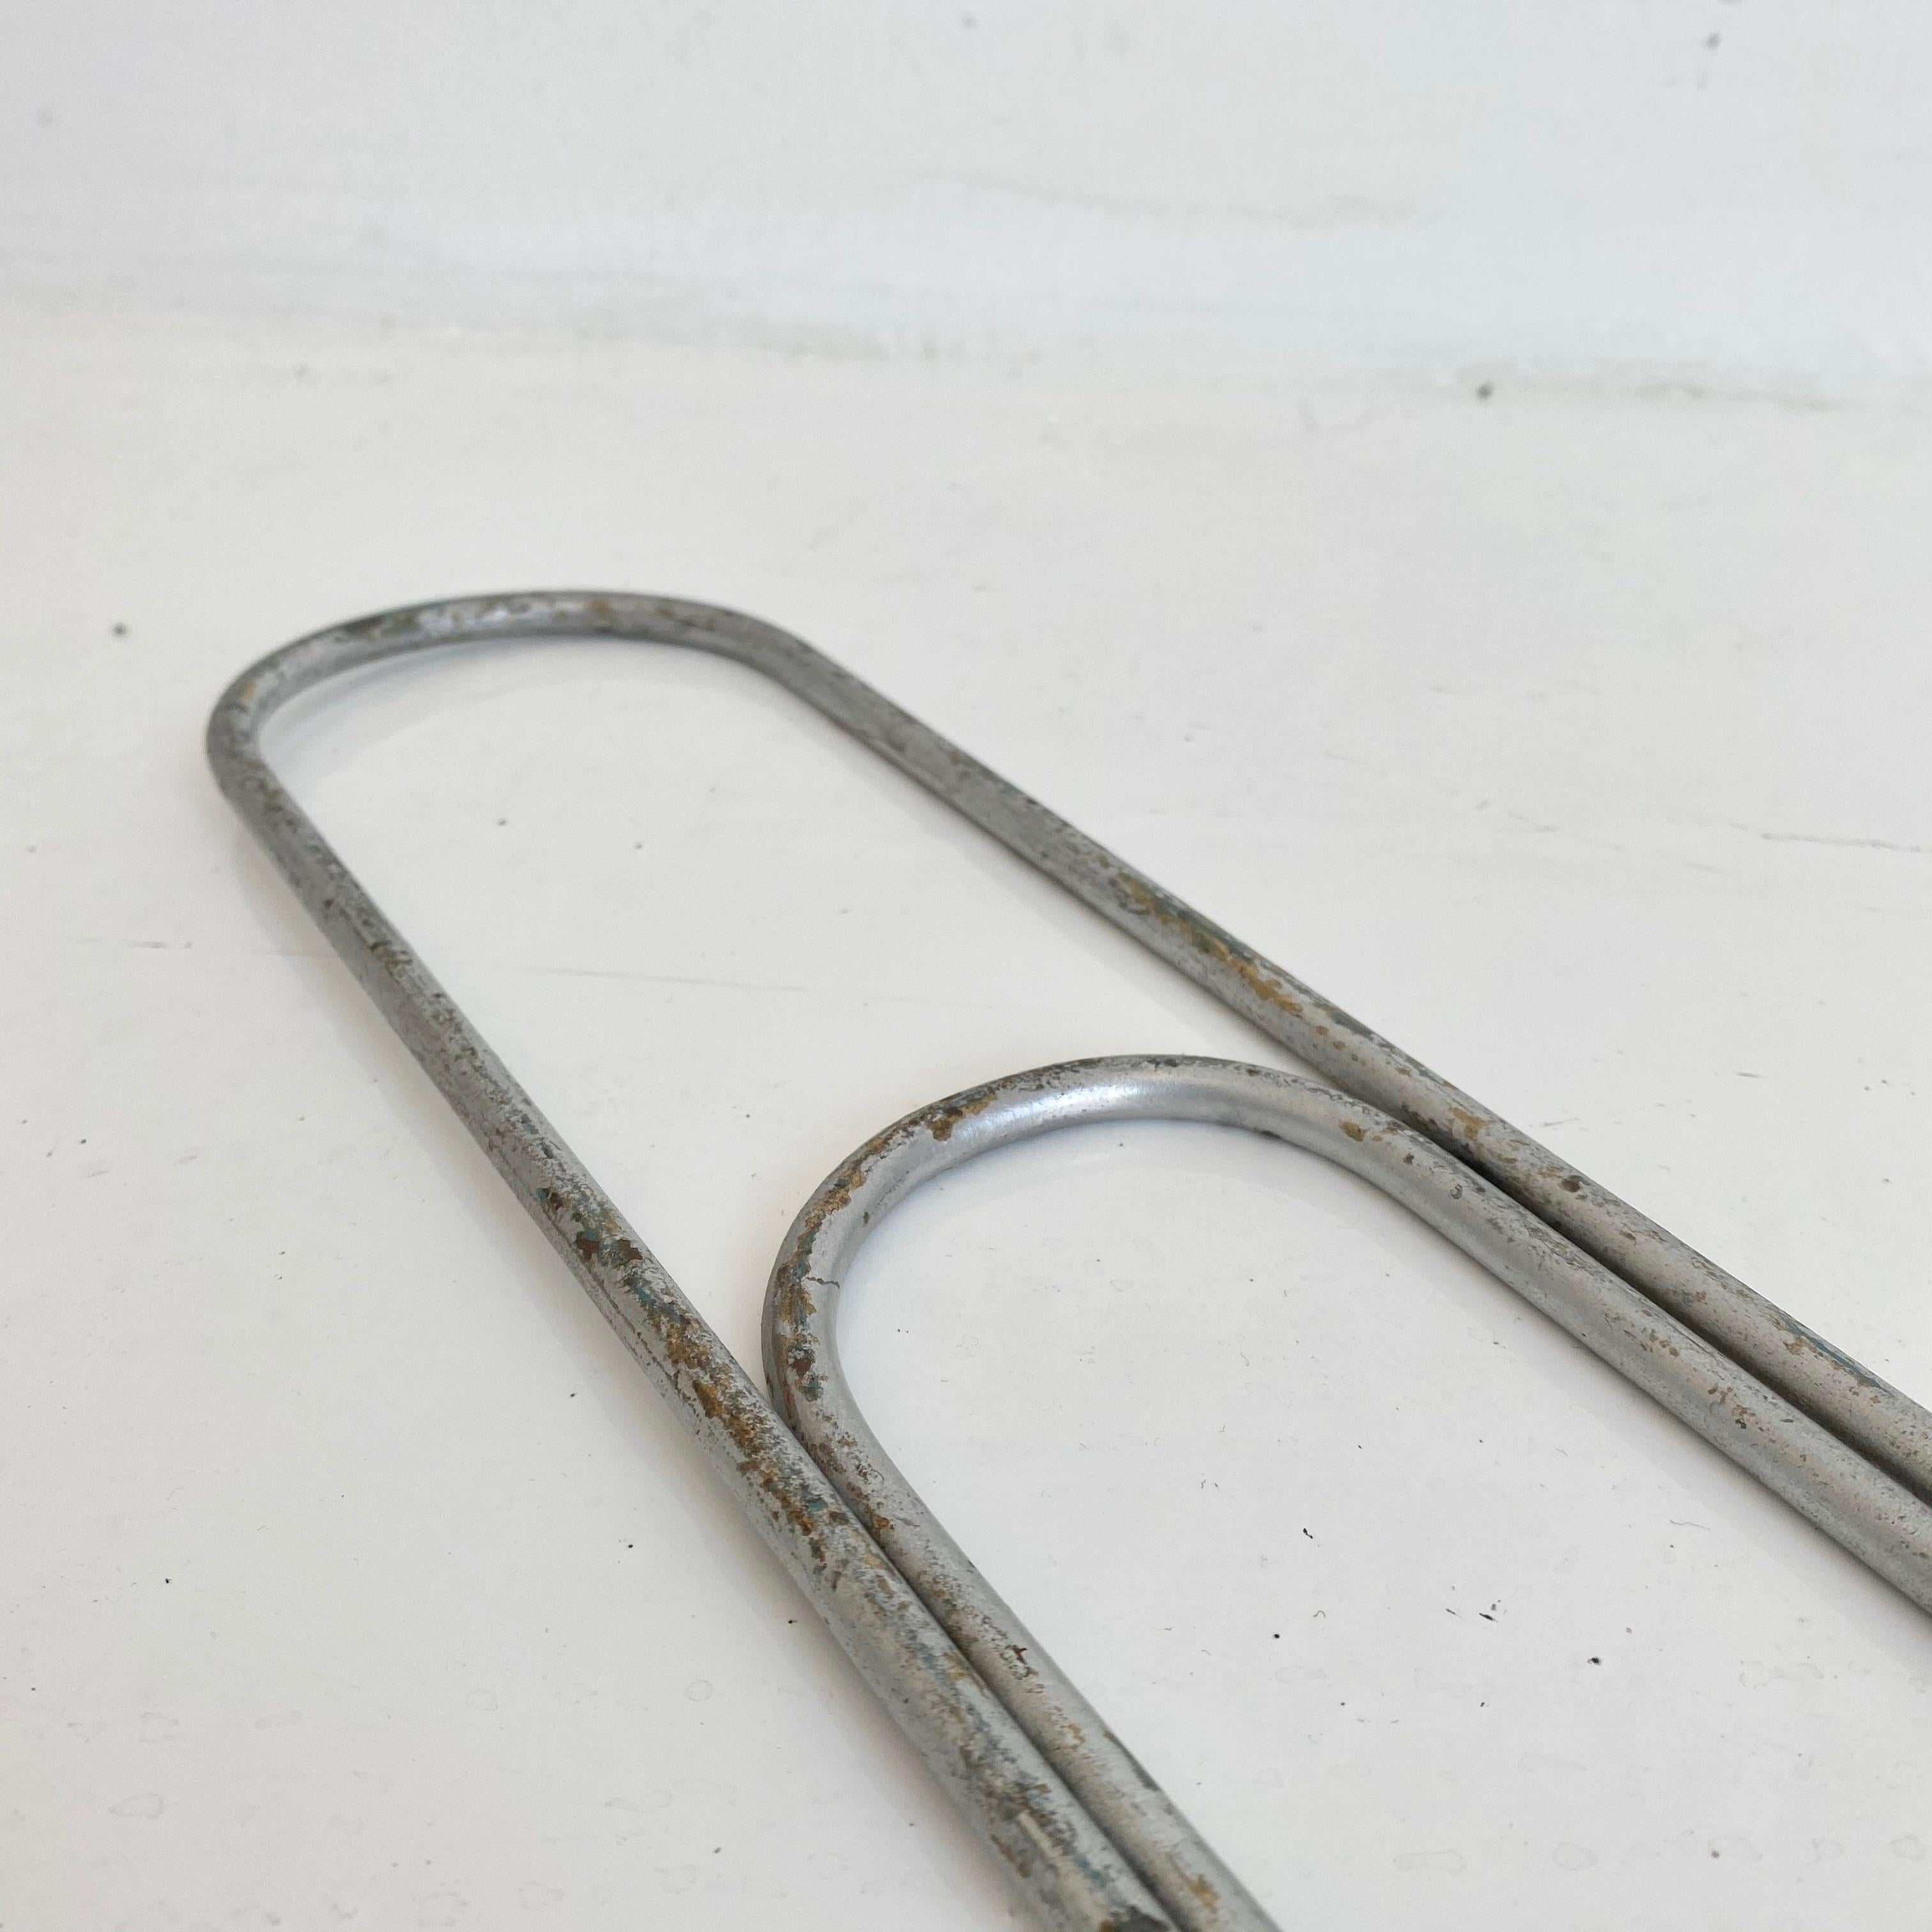 Monumental Metal Paper Clip In Good Condition For Sale In Los Angeles, CA